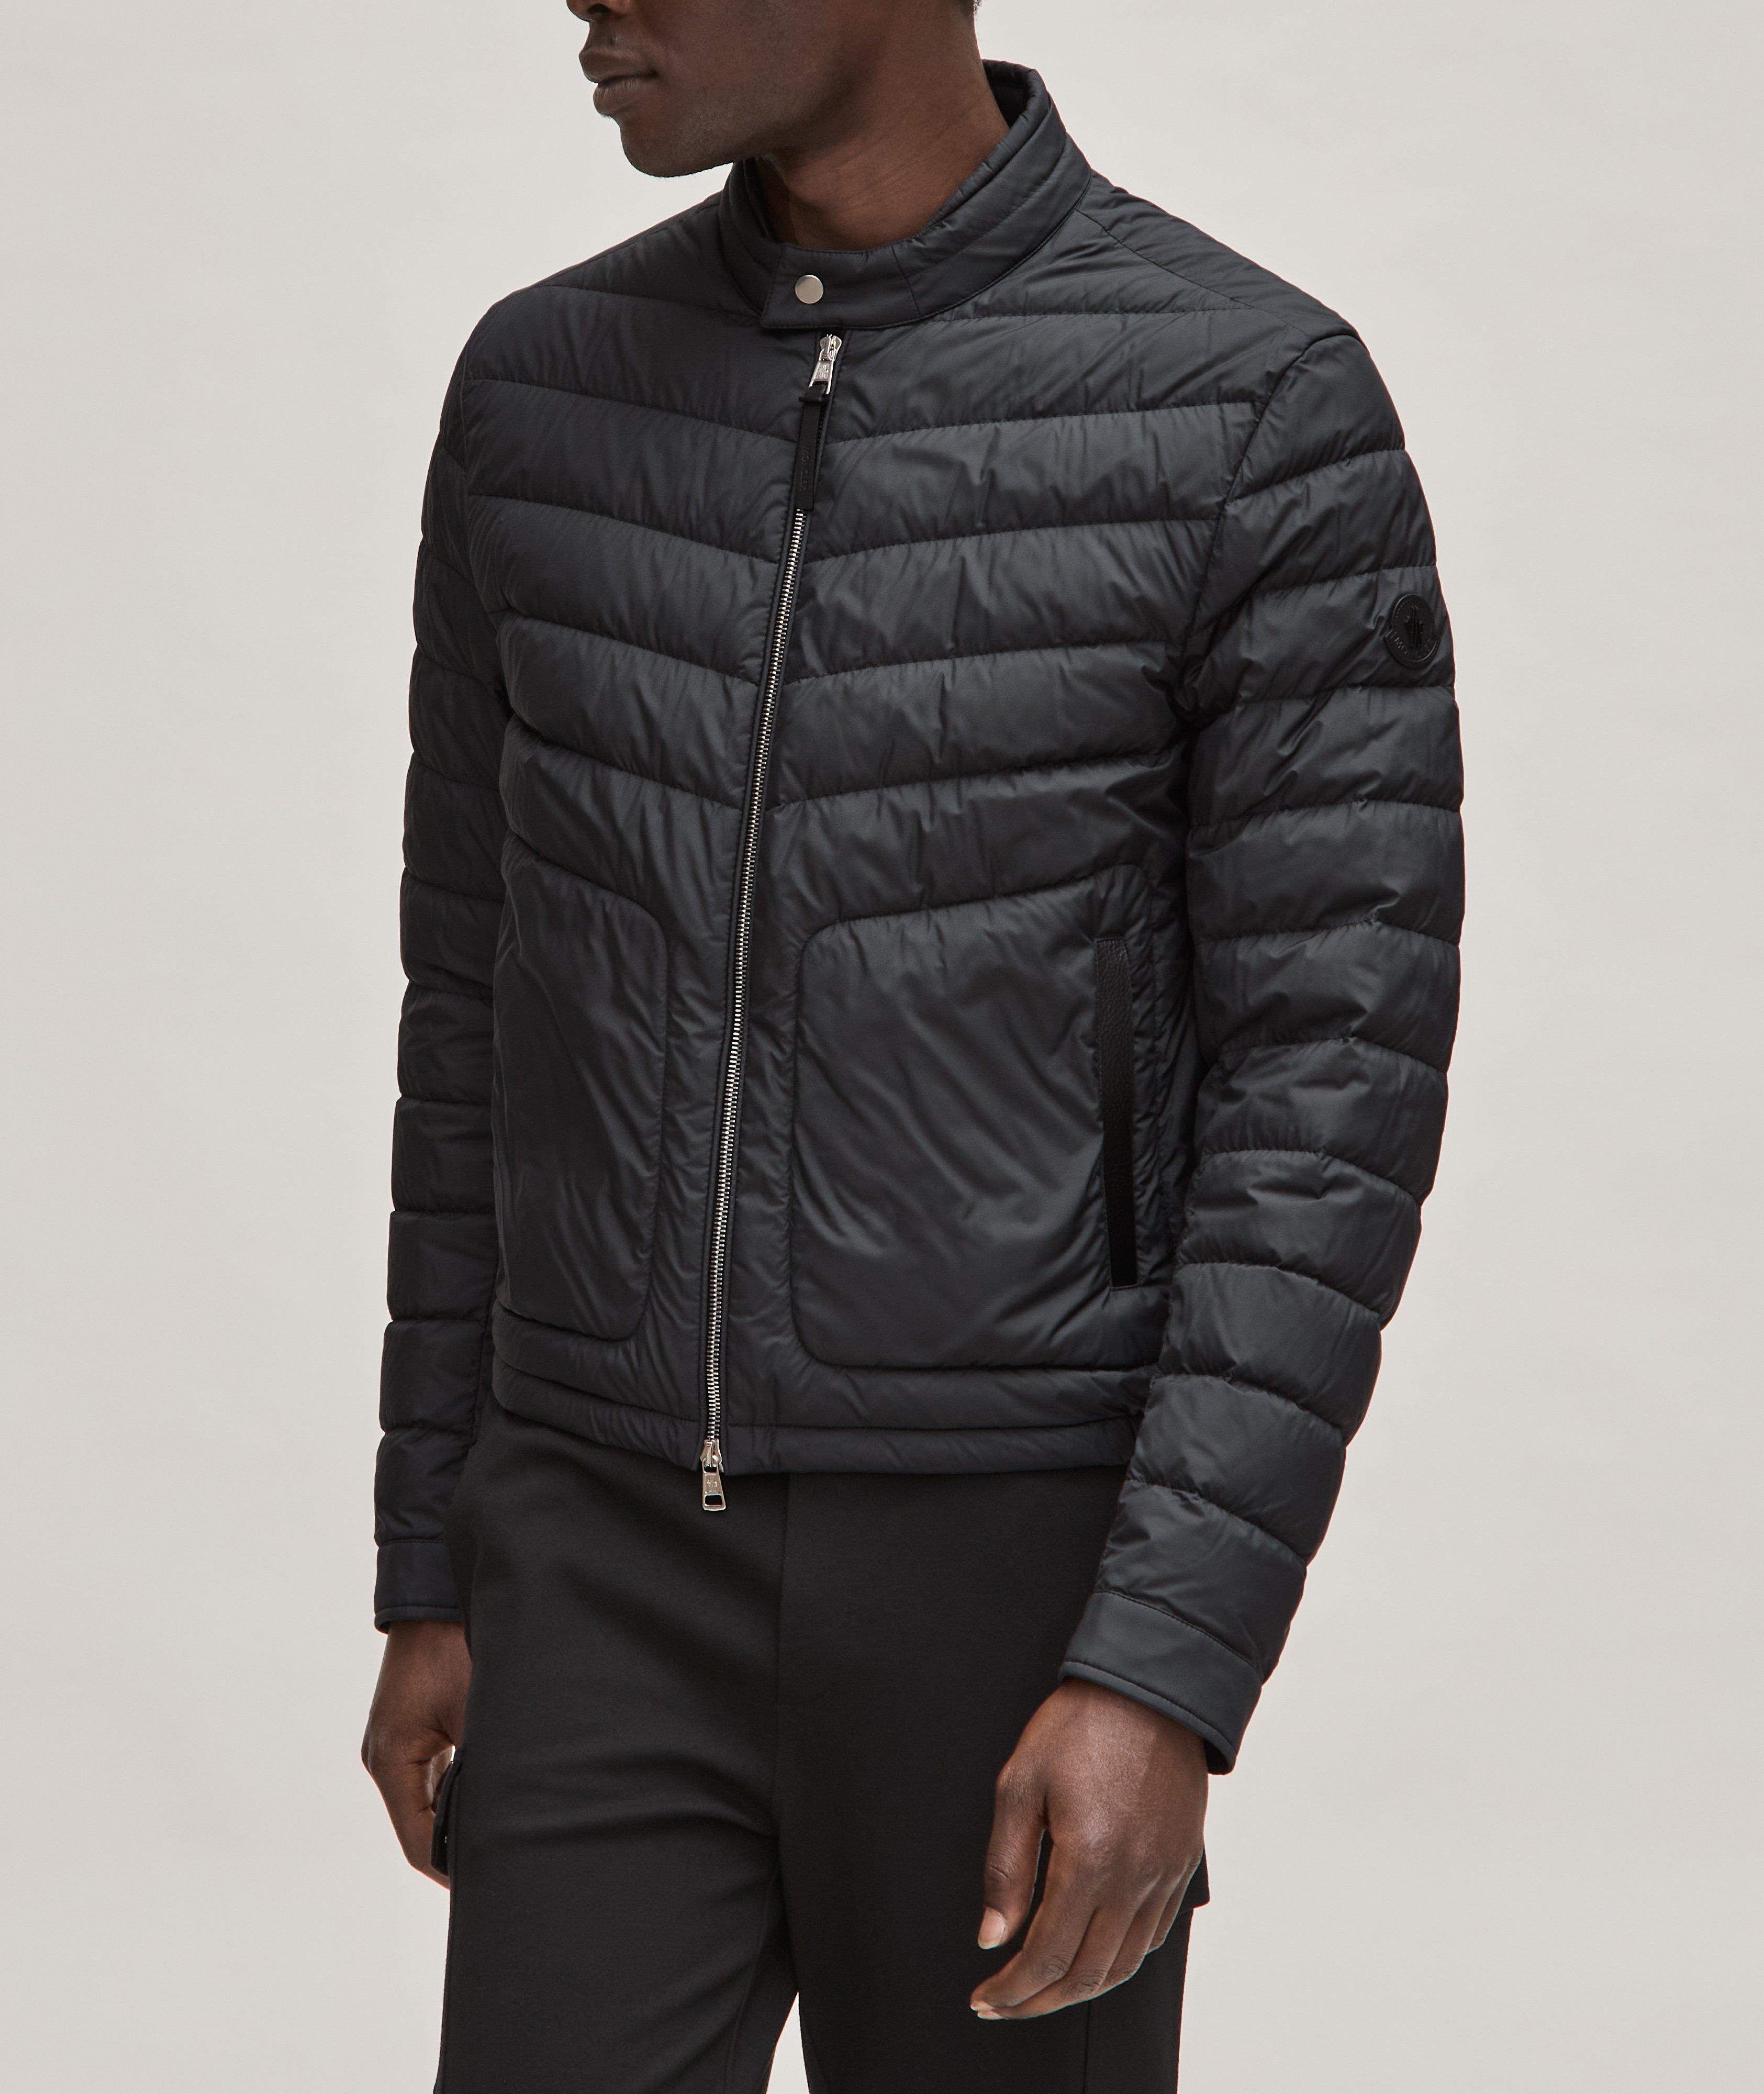 Maurienne Quilted Jacket image 1